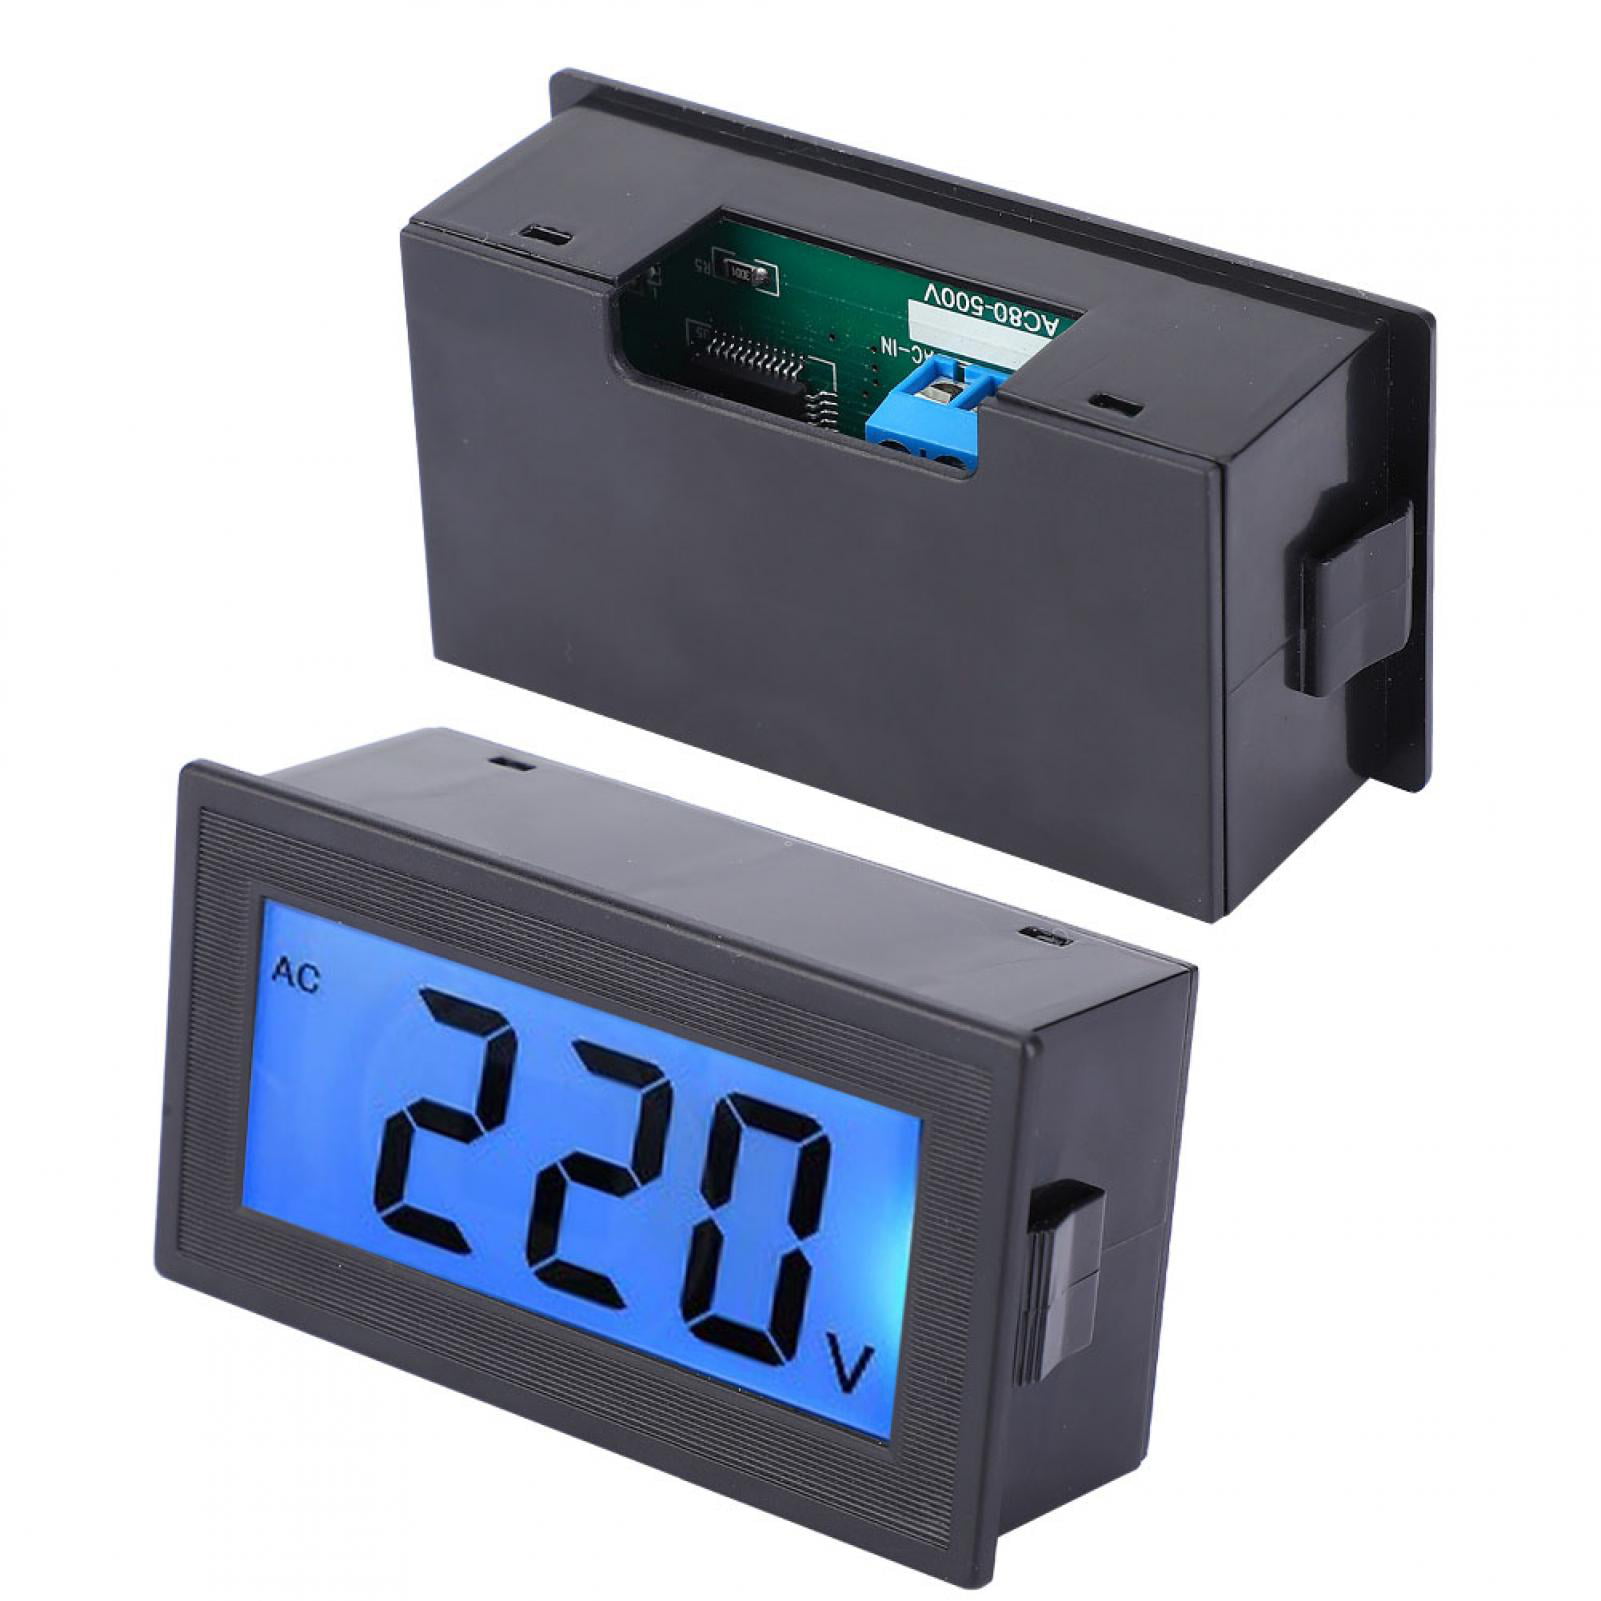 LED Panel Voltmeter High Stability Yellow Voltage Monitor Low Power with hInternational Standard Size 